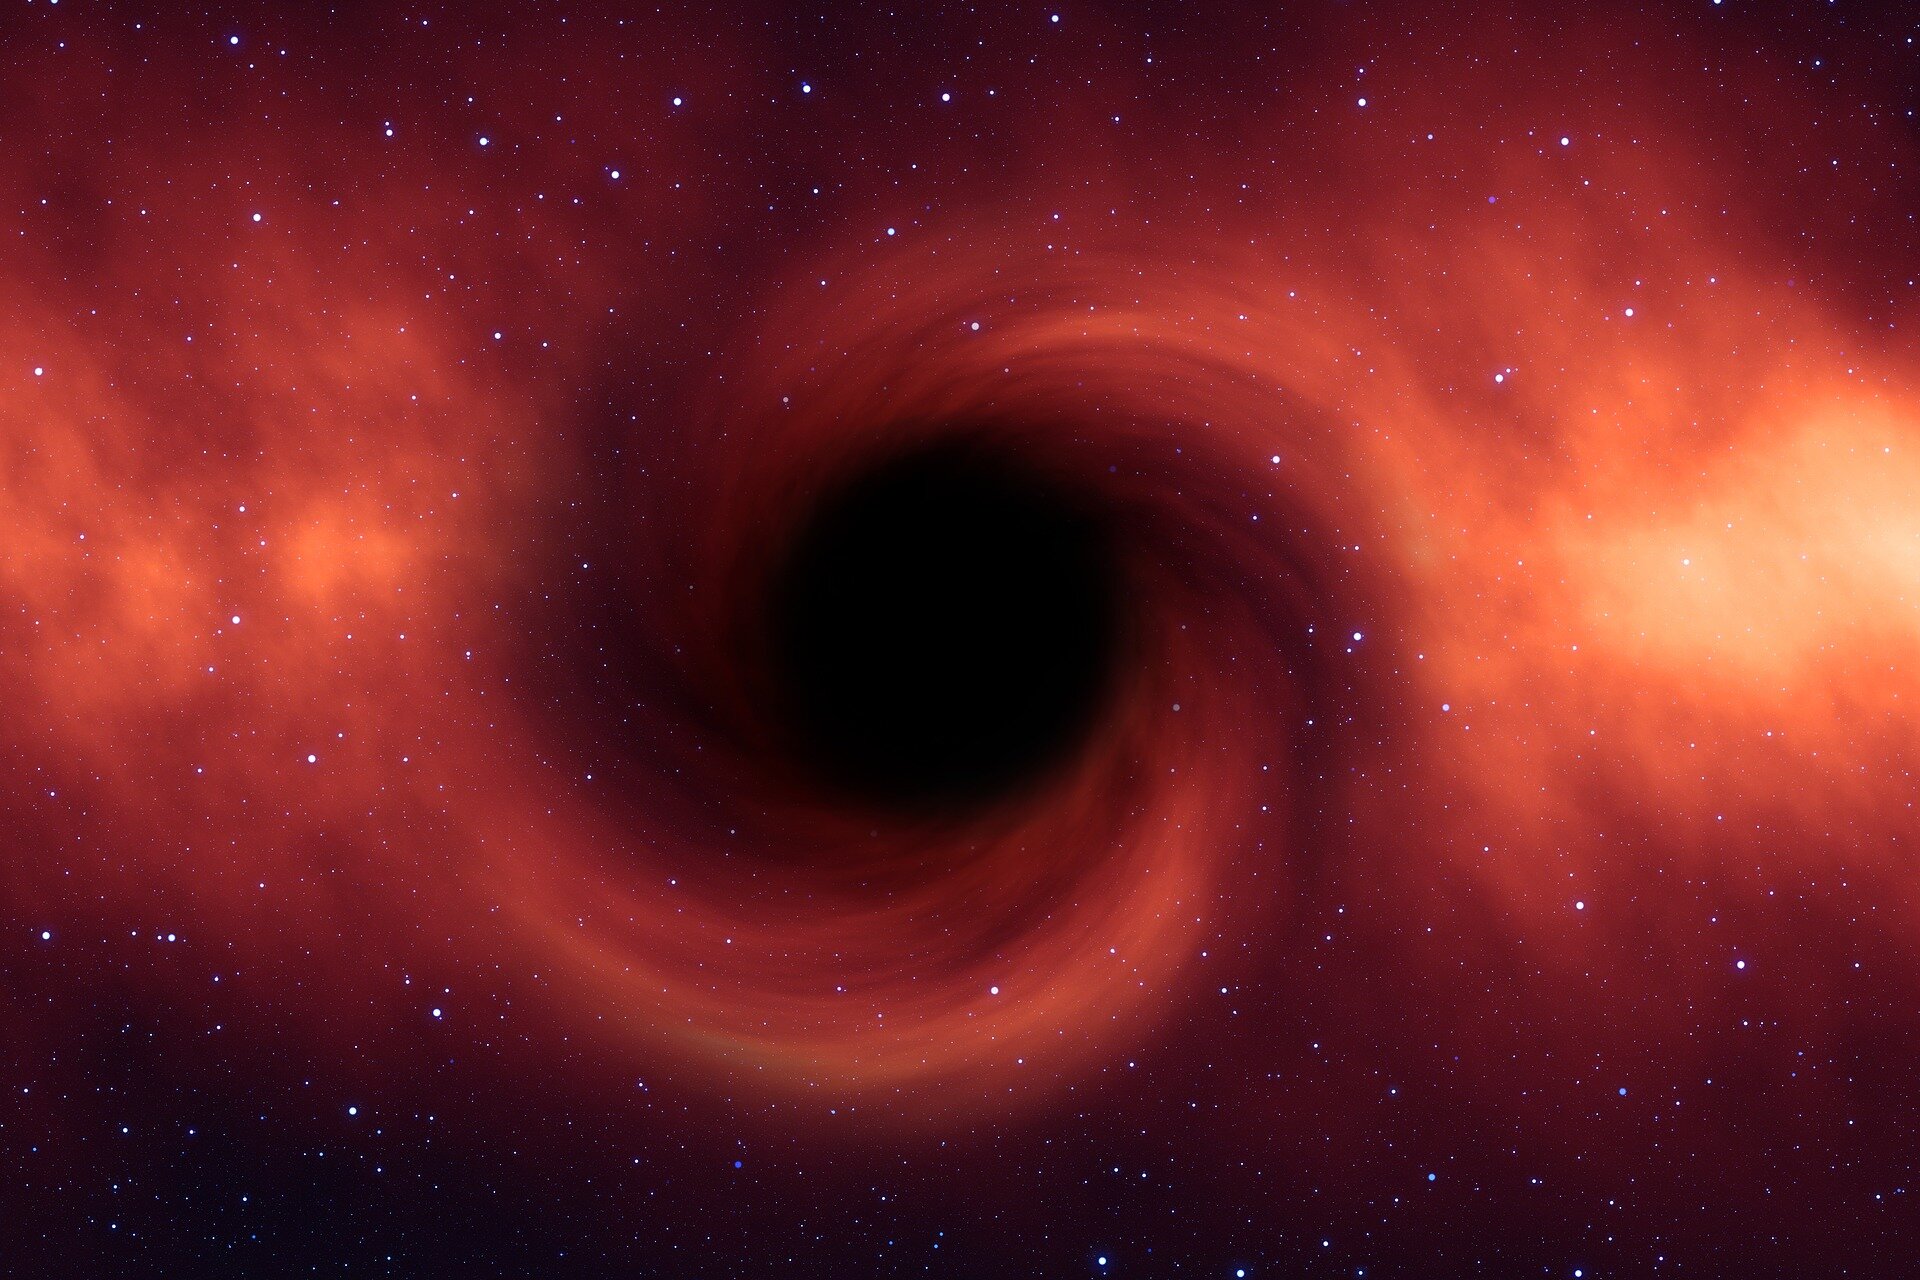 “Wobbling Black Hole” Most Extreme Example Ever Detected